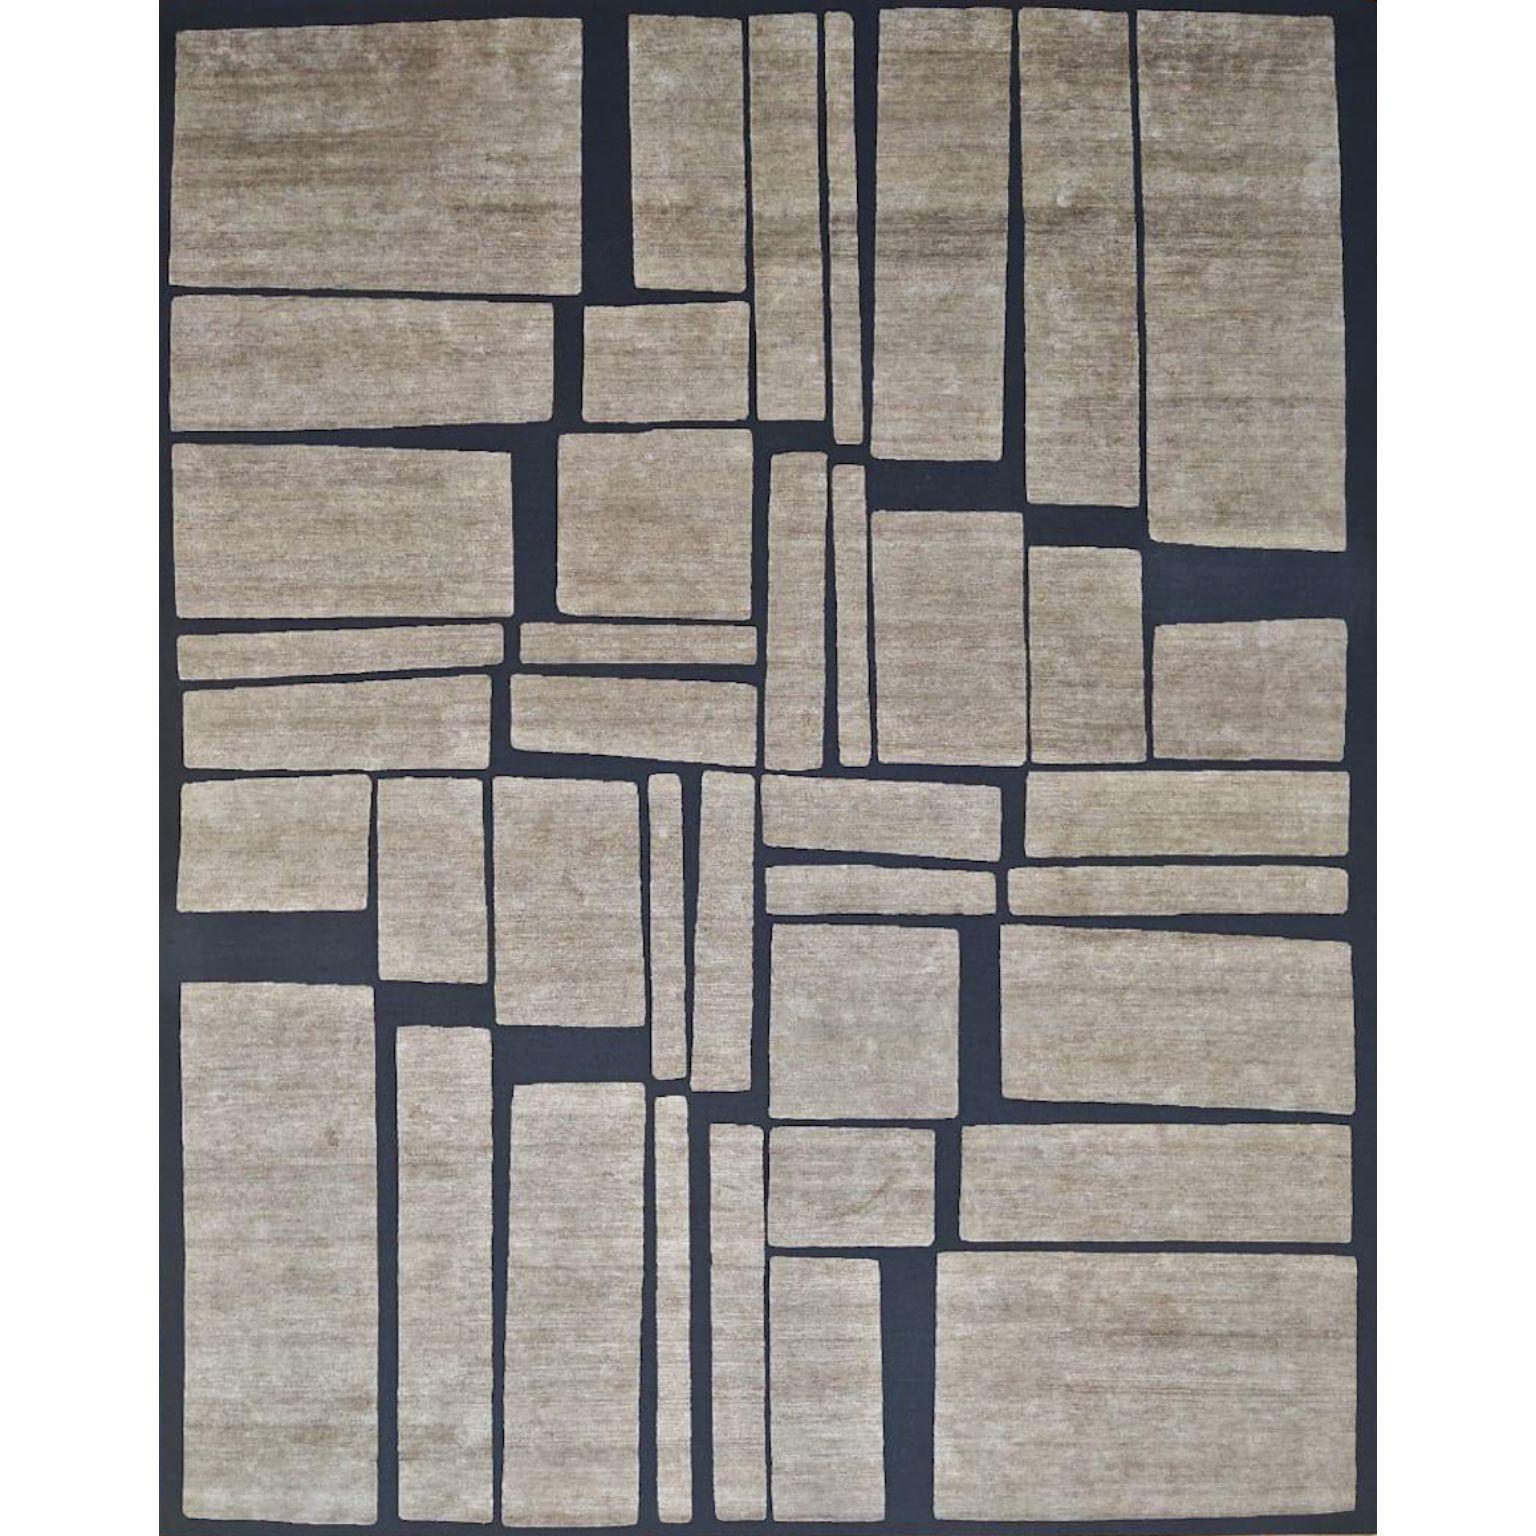 Windowpane large rug by Art & Loom
Dimensions: D304.8 x H426.7 cm
Materials: Allo & New Zealand wool
Quality (Knots per Inch): 100
Also available in different dimensions.

Samantha Gallacher has always had a keen eye for aesthetics, drawing